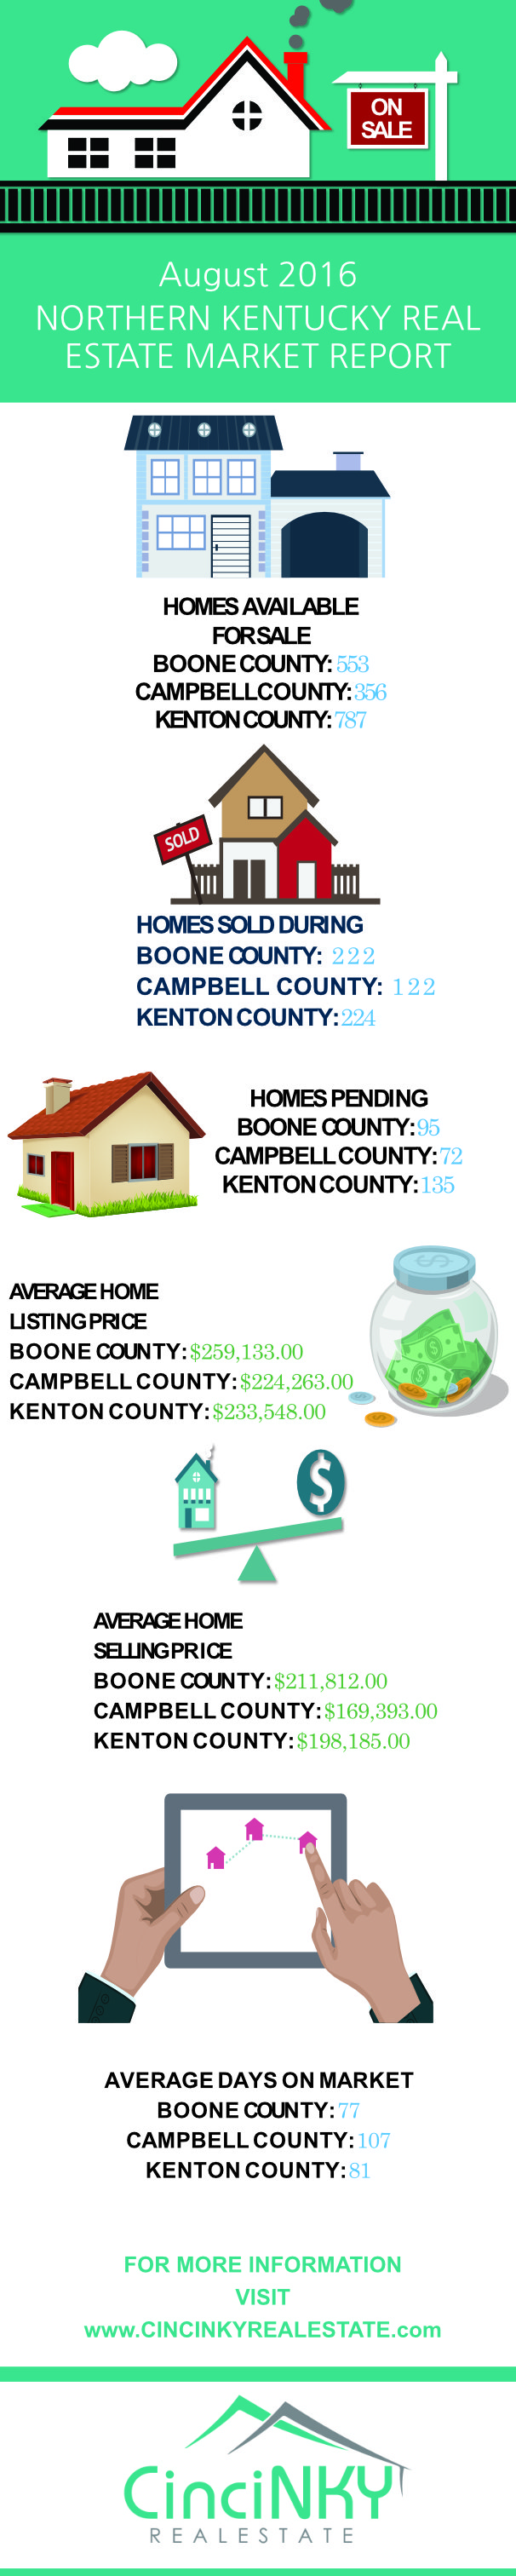 august 2016 northern kentucky real estate market report infographic